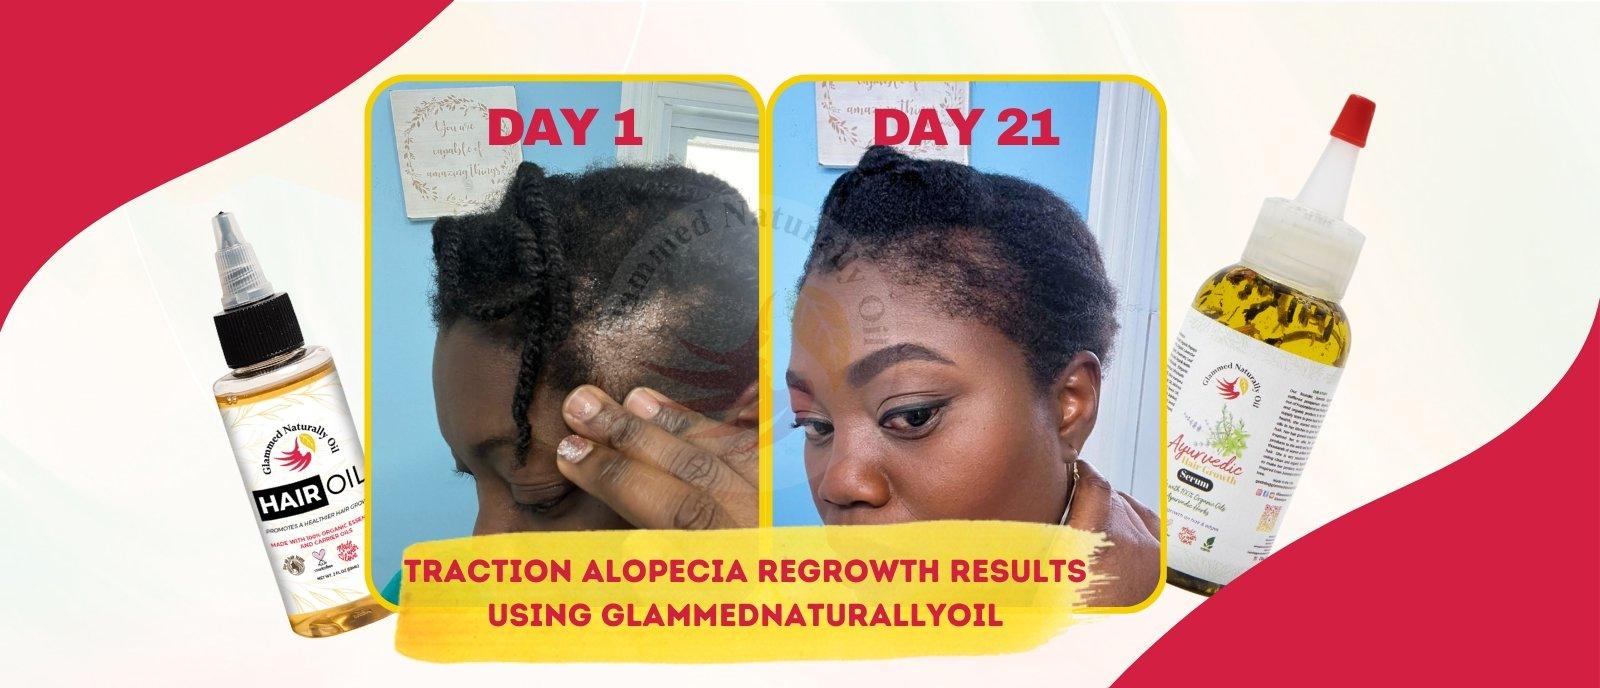 Traction alopecia before and after results - GlammedNaturallyOil